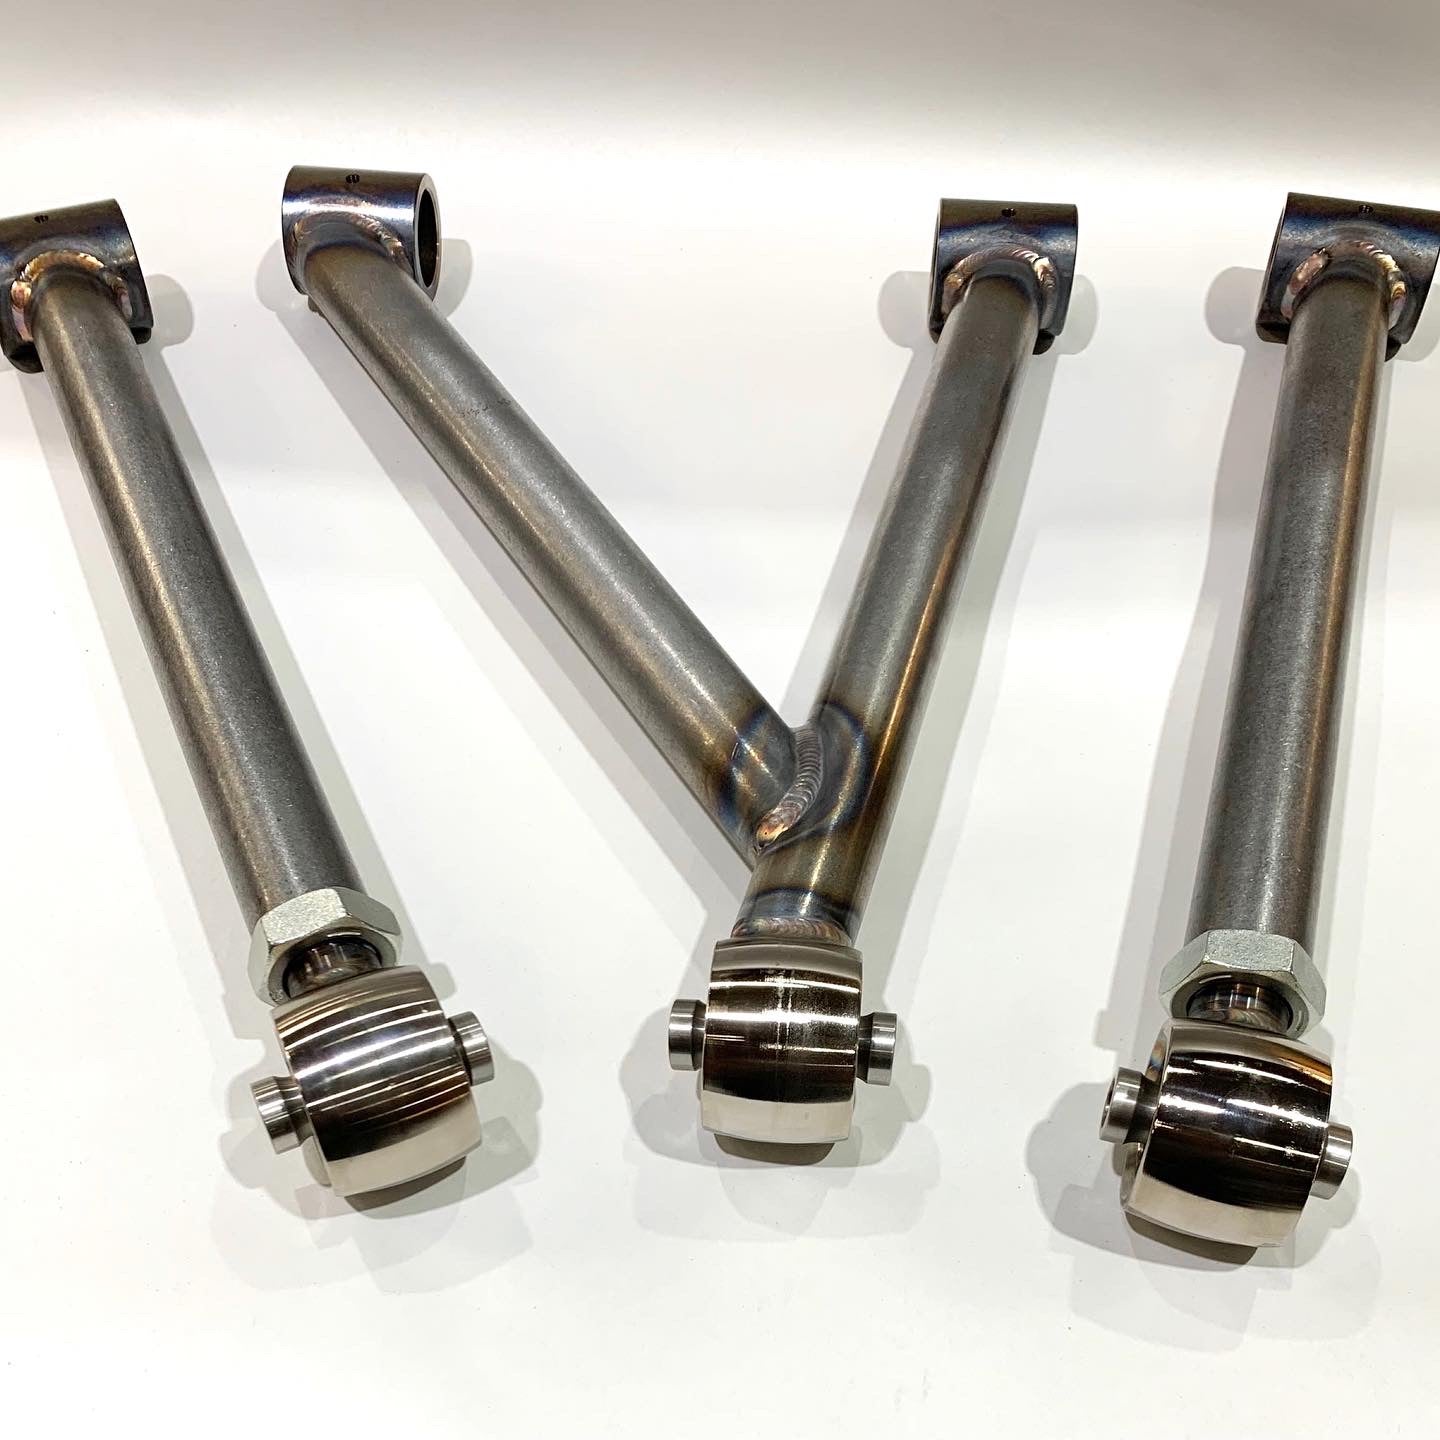 100 Percent Bolt-on S10 3-Link Kit w/ RideTech R-Joints